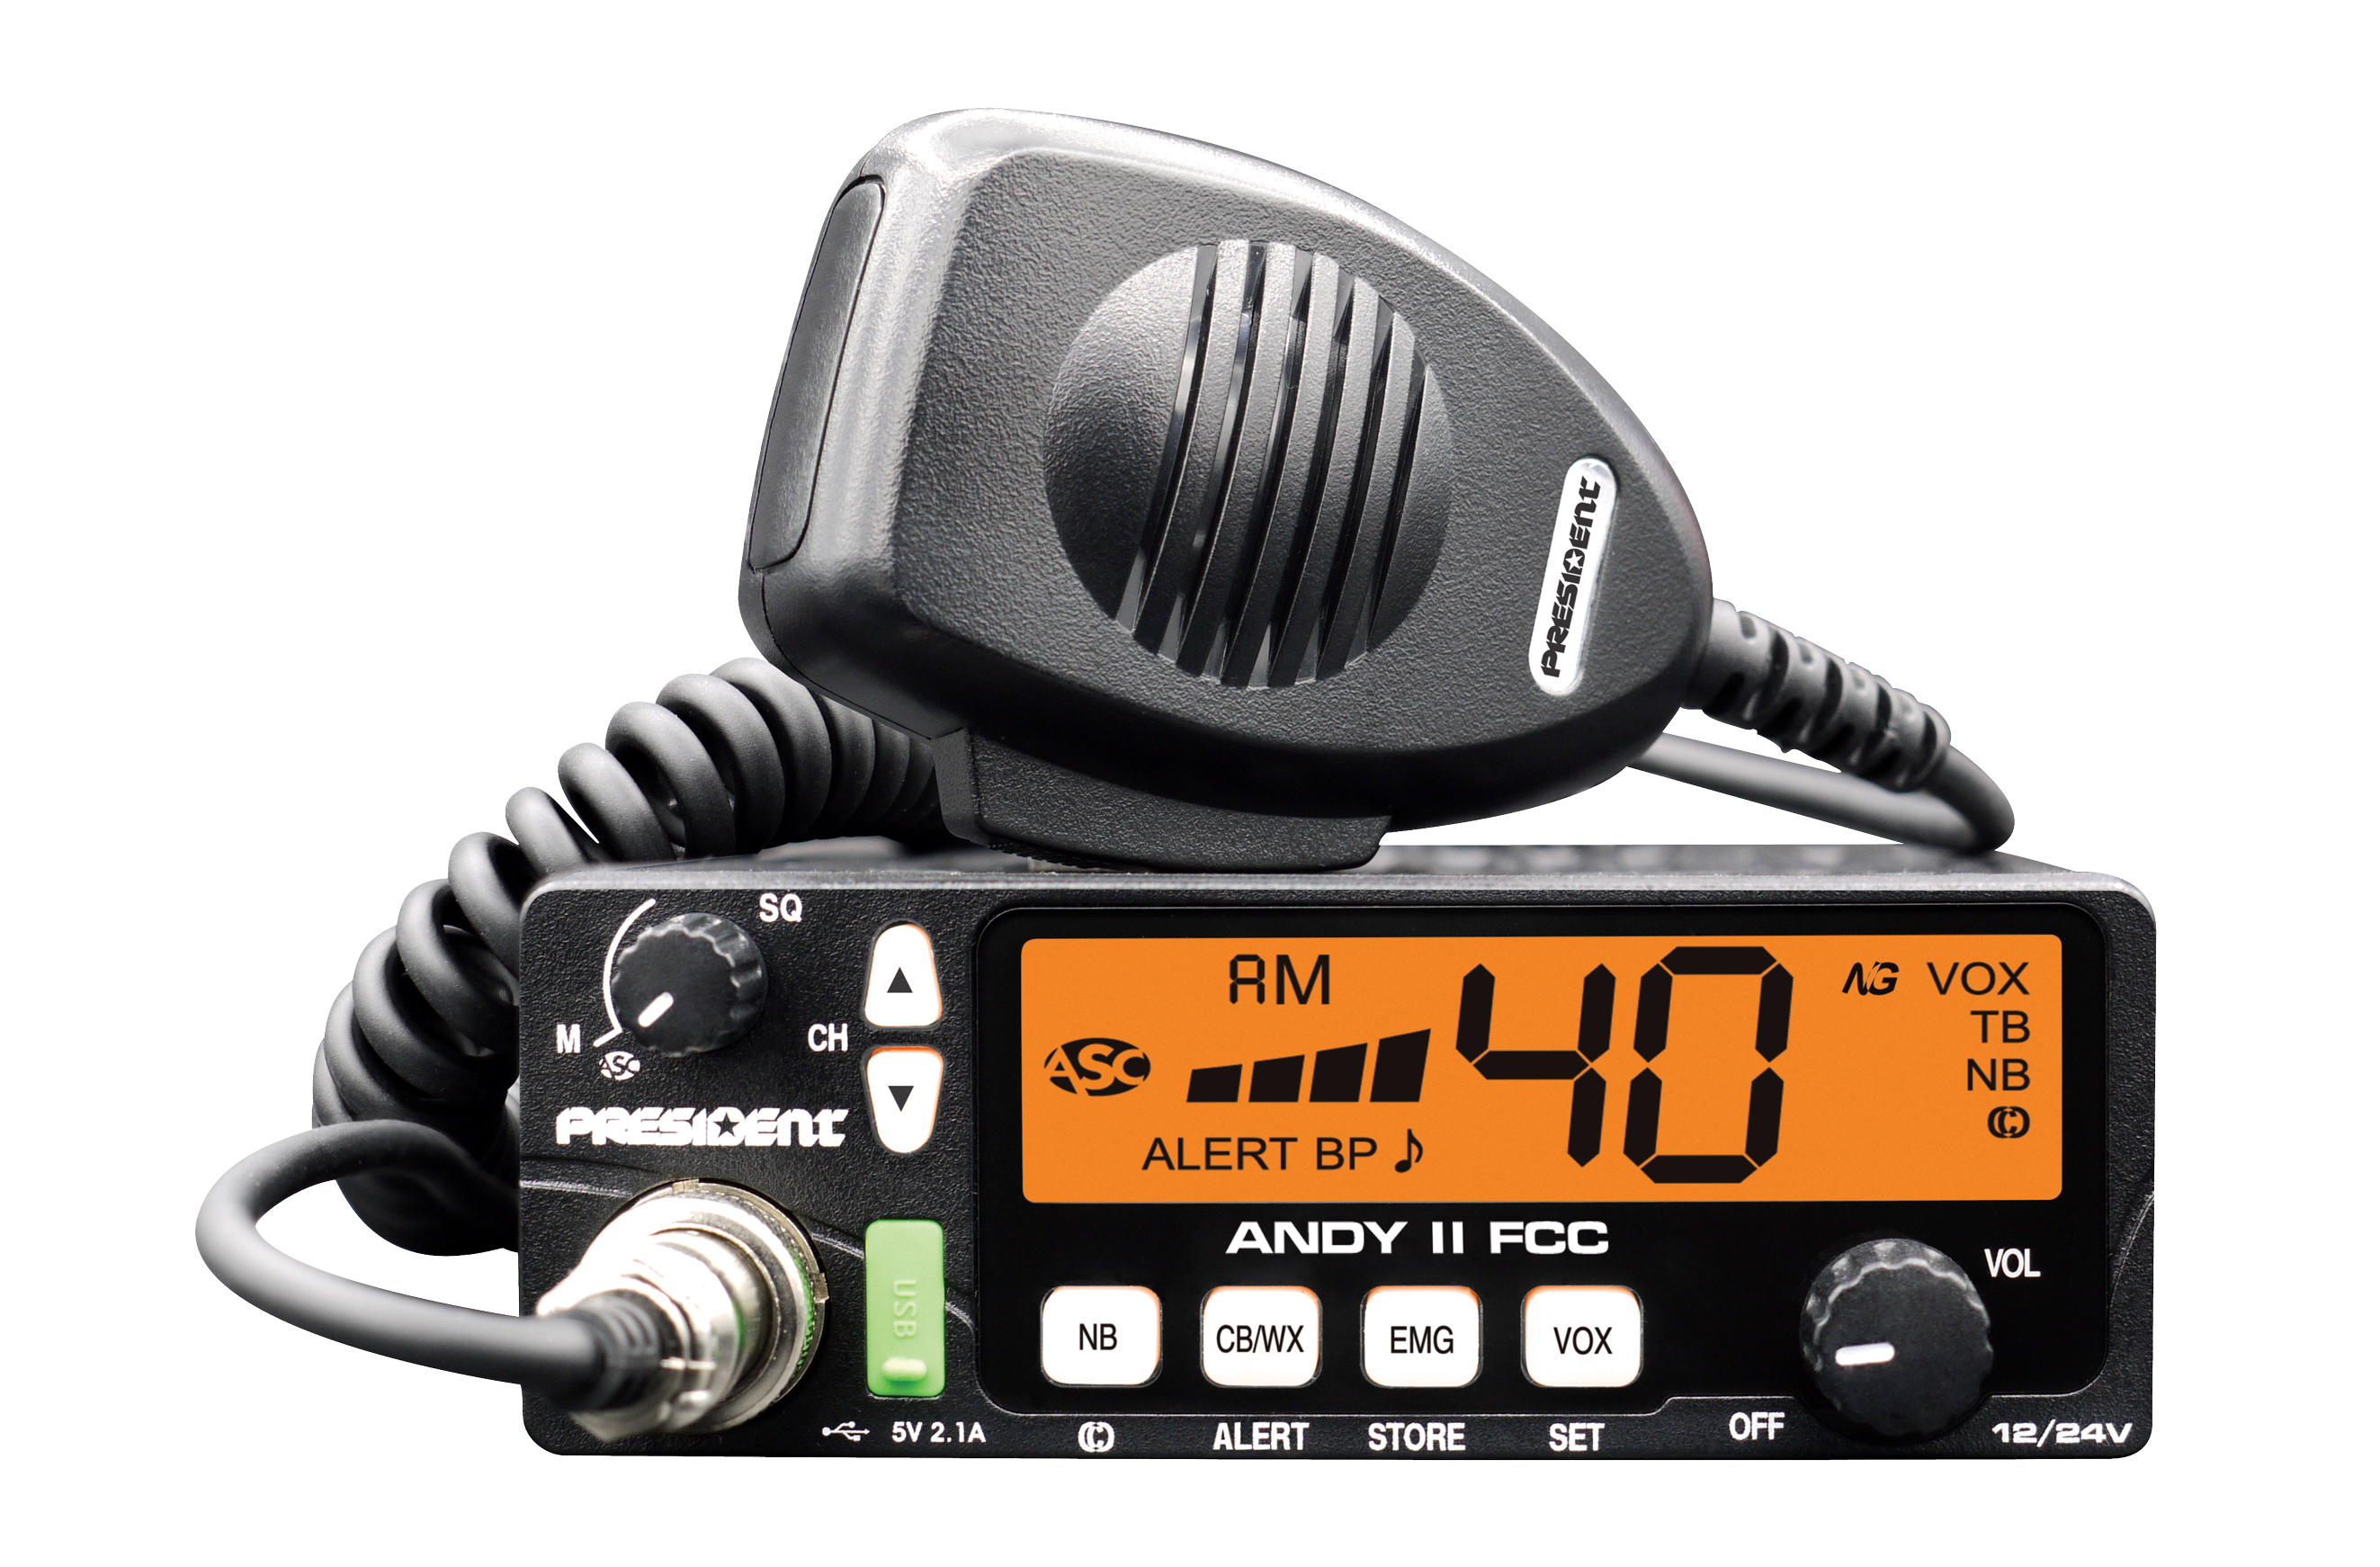 President Electronics USA Introduces the "ANDY II FCC" CB Radio